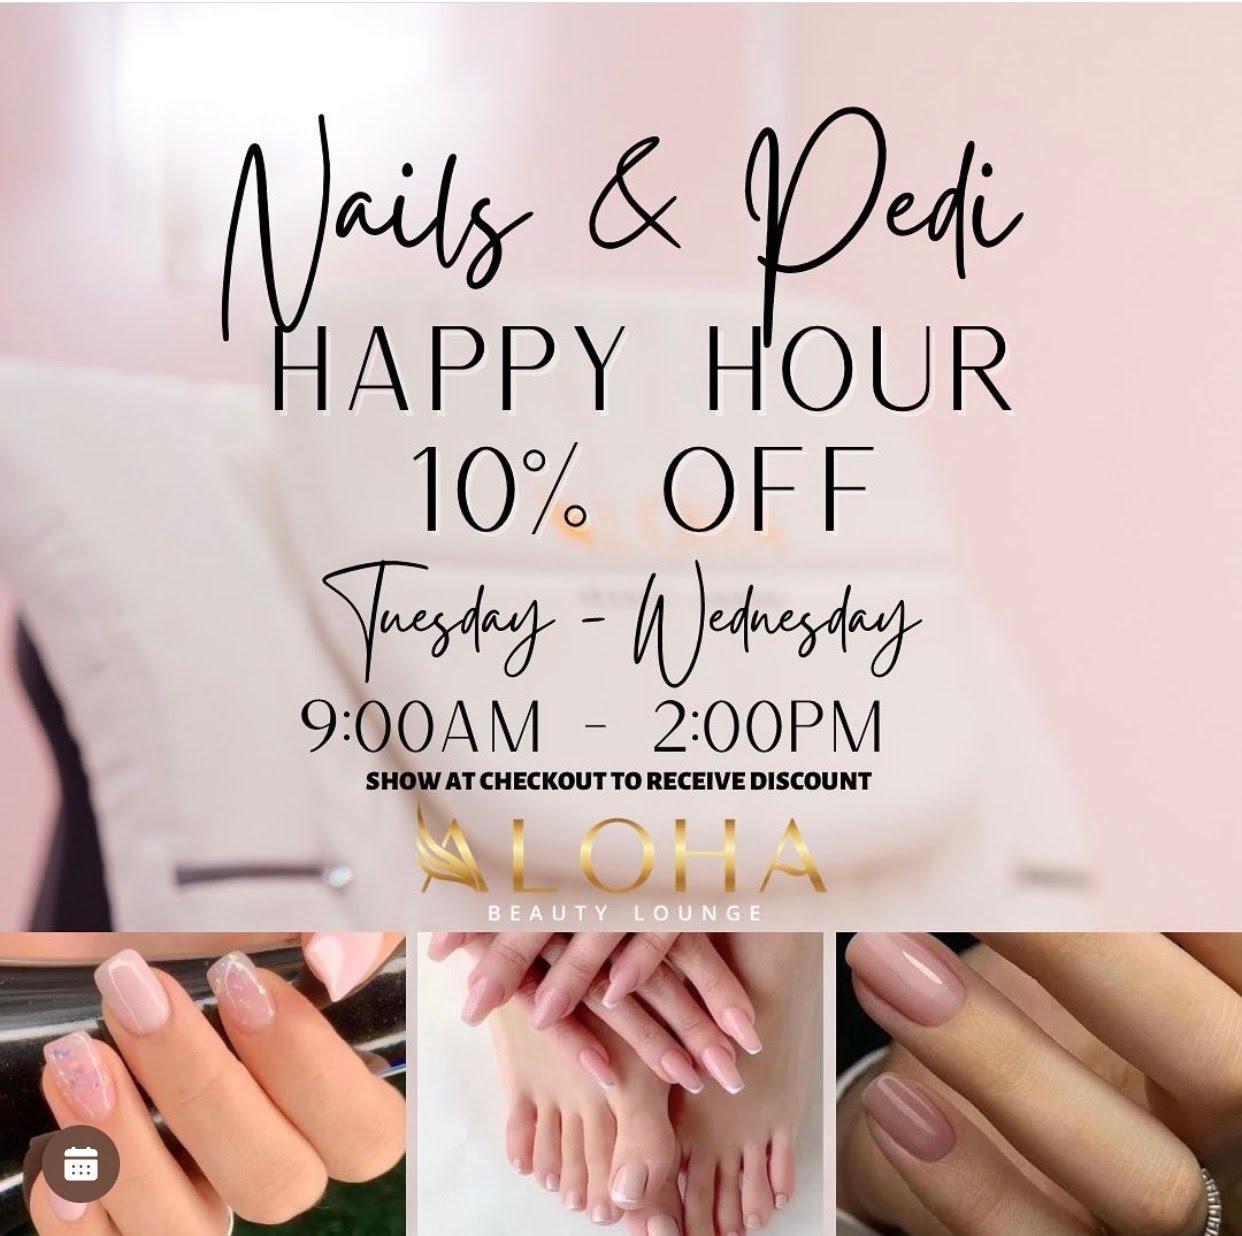 Nail Salon 33556 | Touch Nail Spa III LLC of Odessa, FL | Manicure,  Pedicure, Kid Services, Dipping, Facial, Waxing.